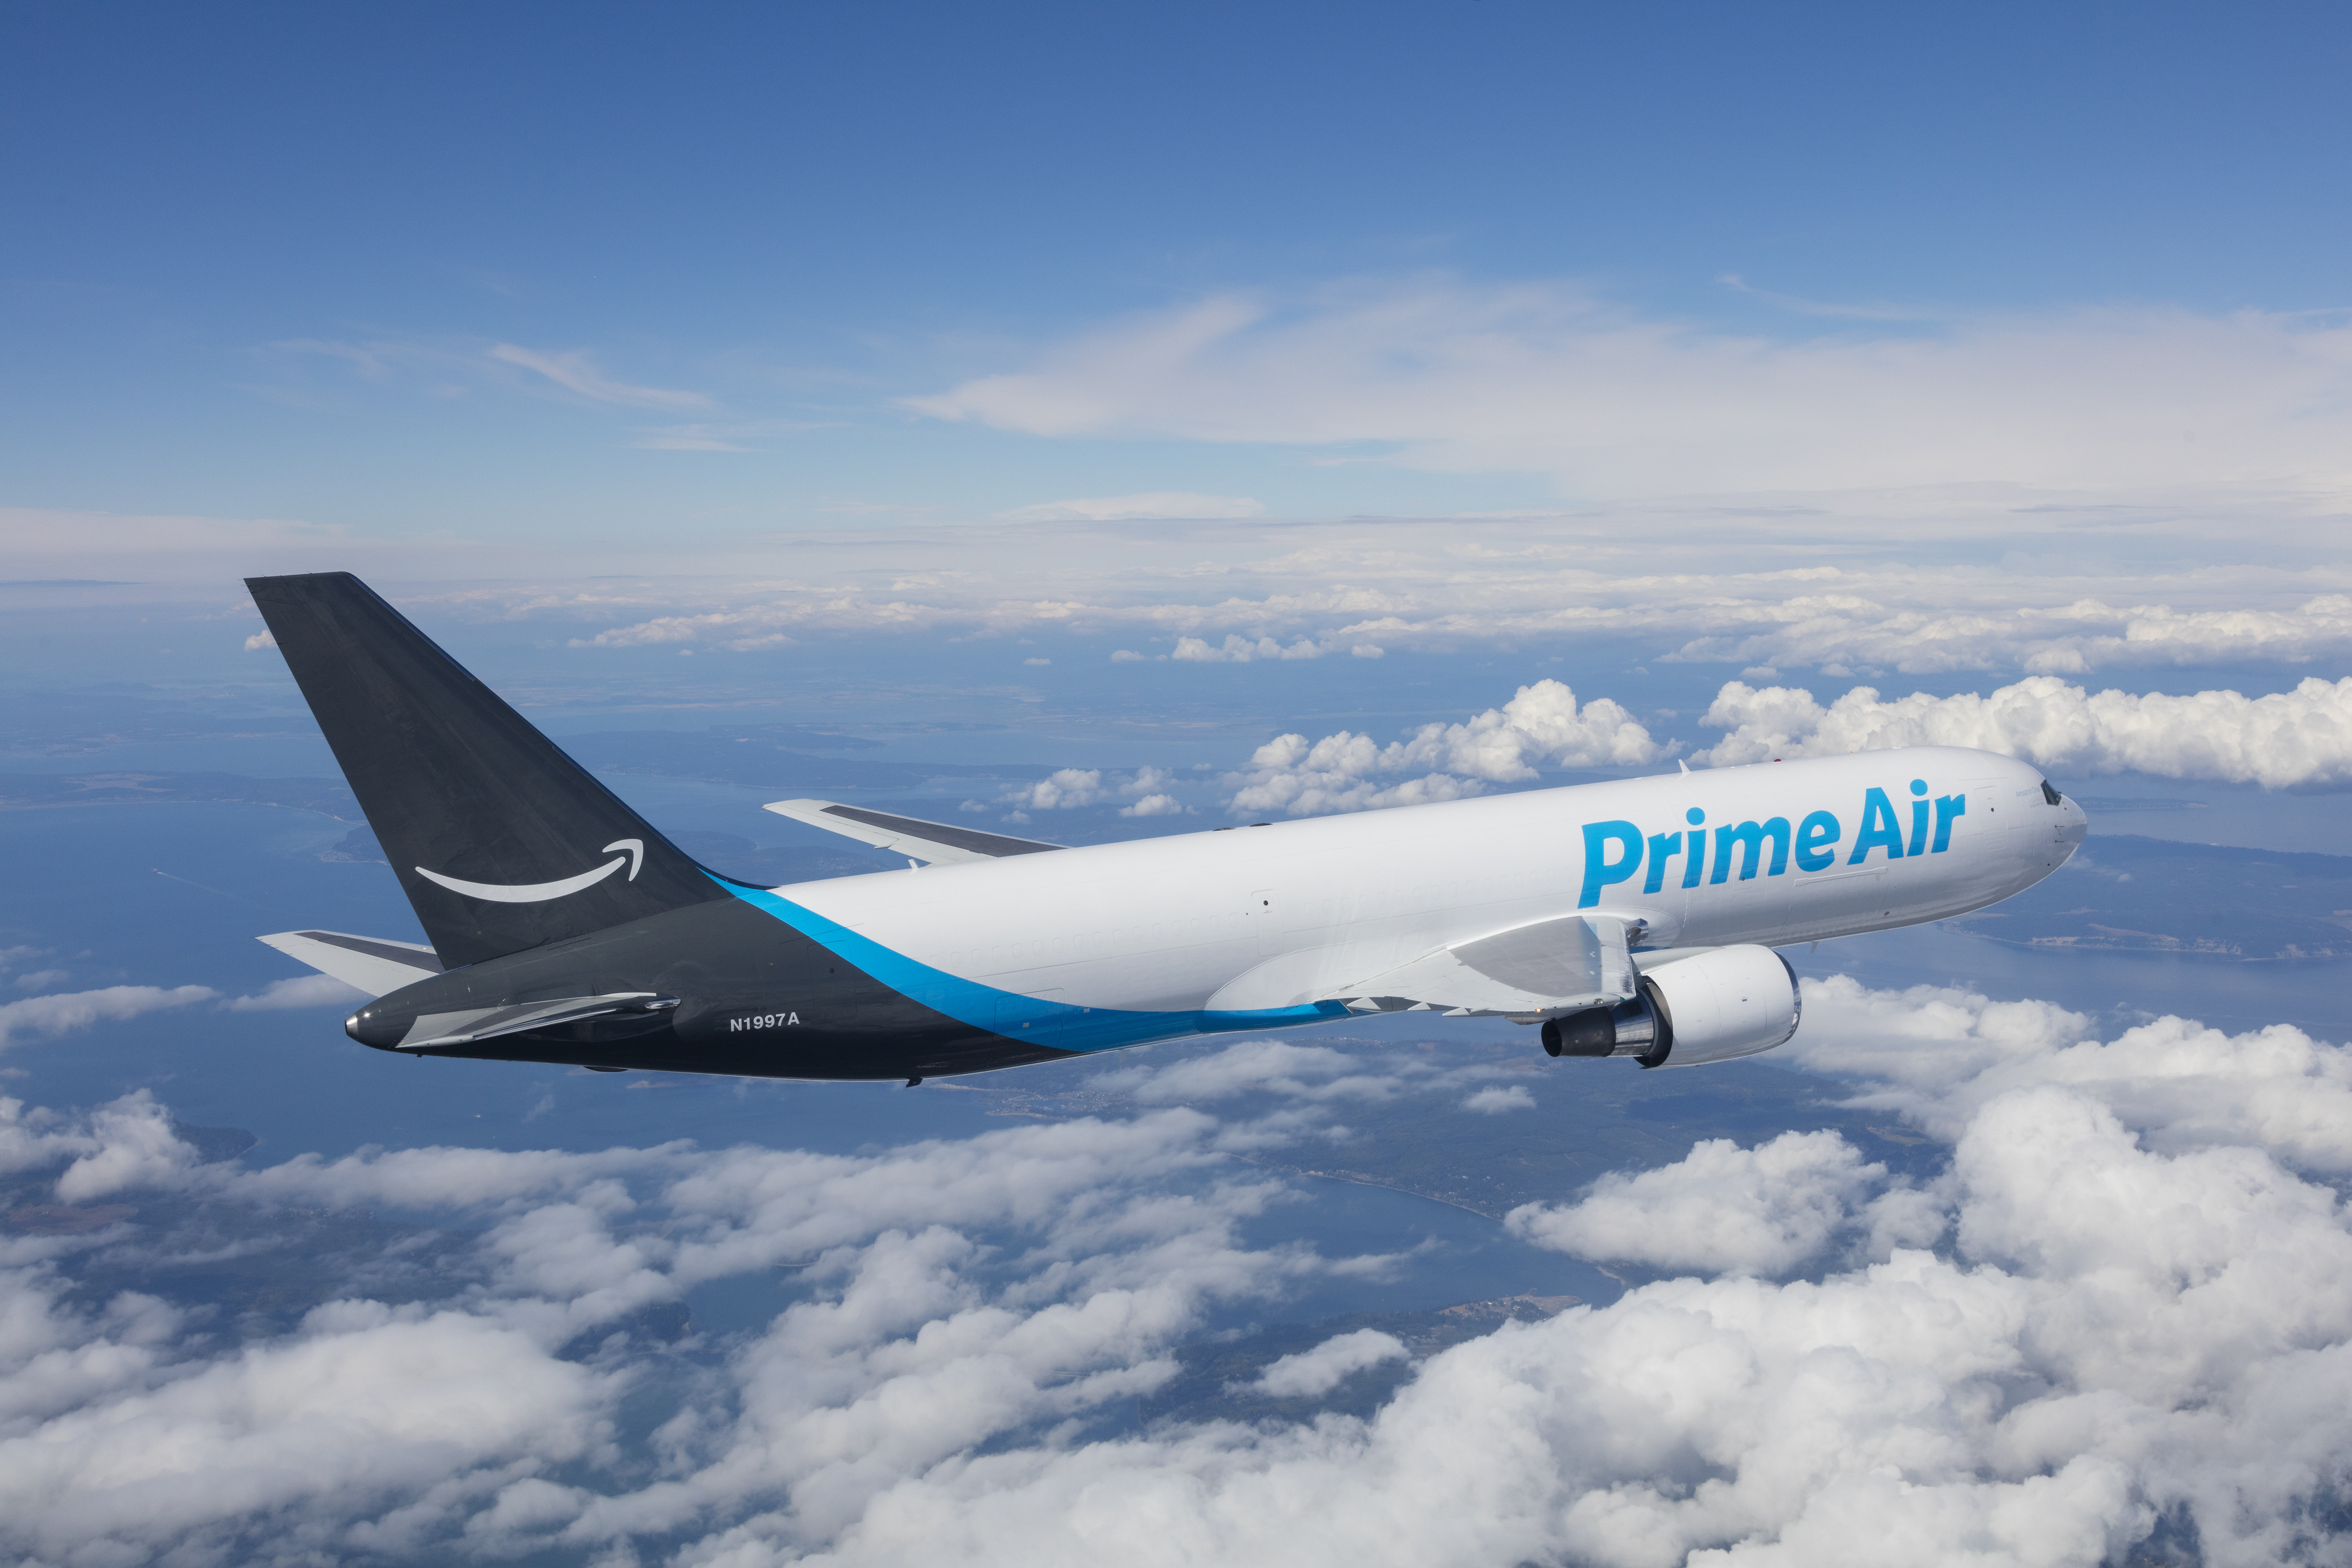 Amazon Air expands with 10 more cargo aircraft, bringing fleet to 50 planes  | TechCrunch